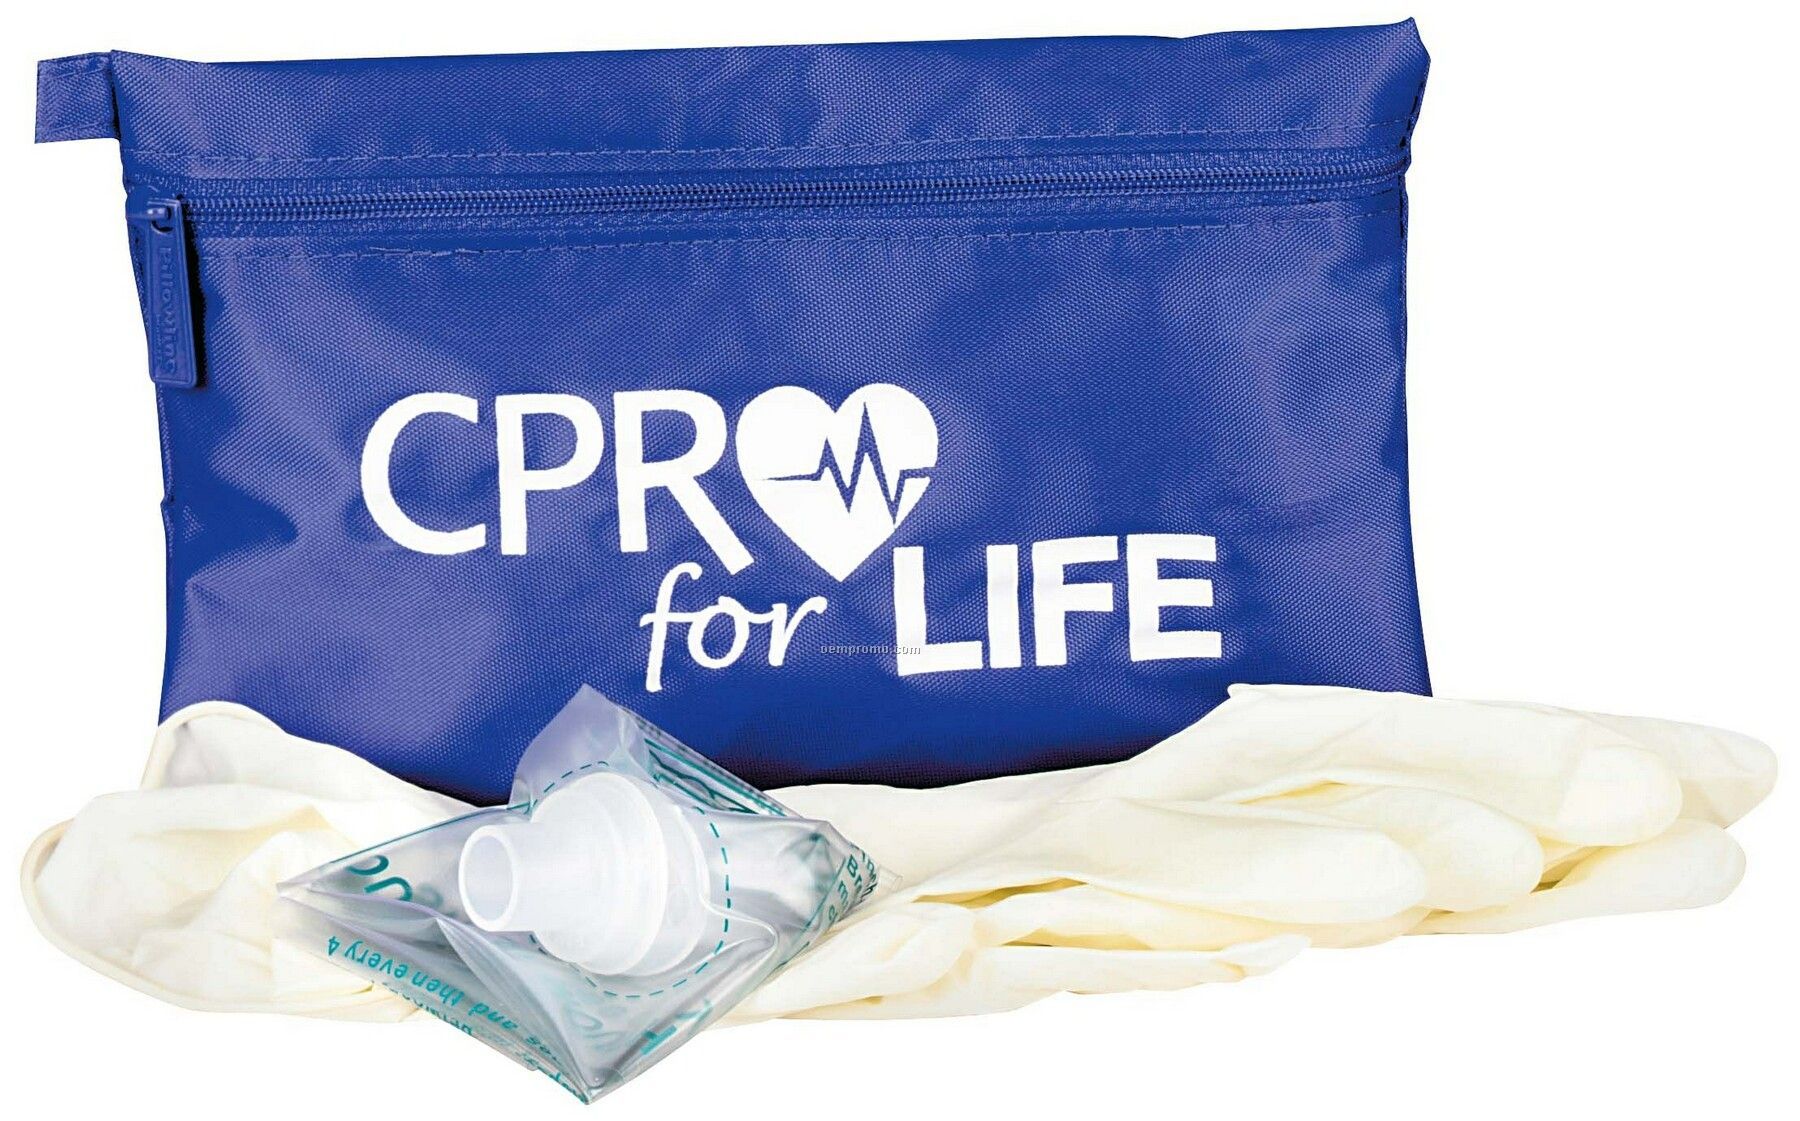 Pillowline Sentry Safety Cpr Kit